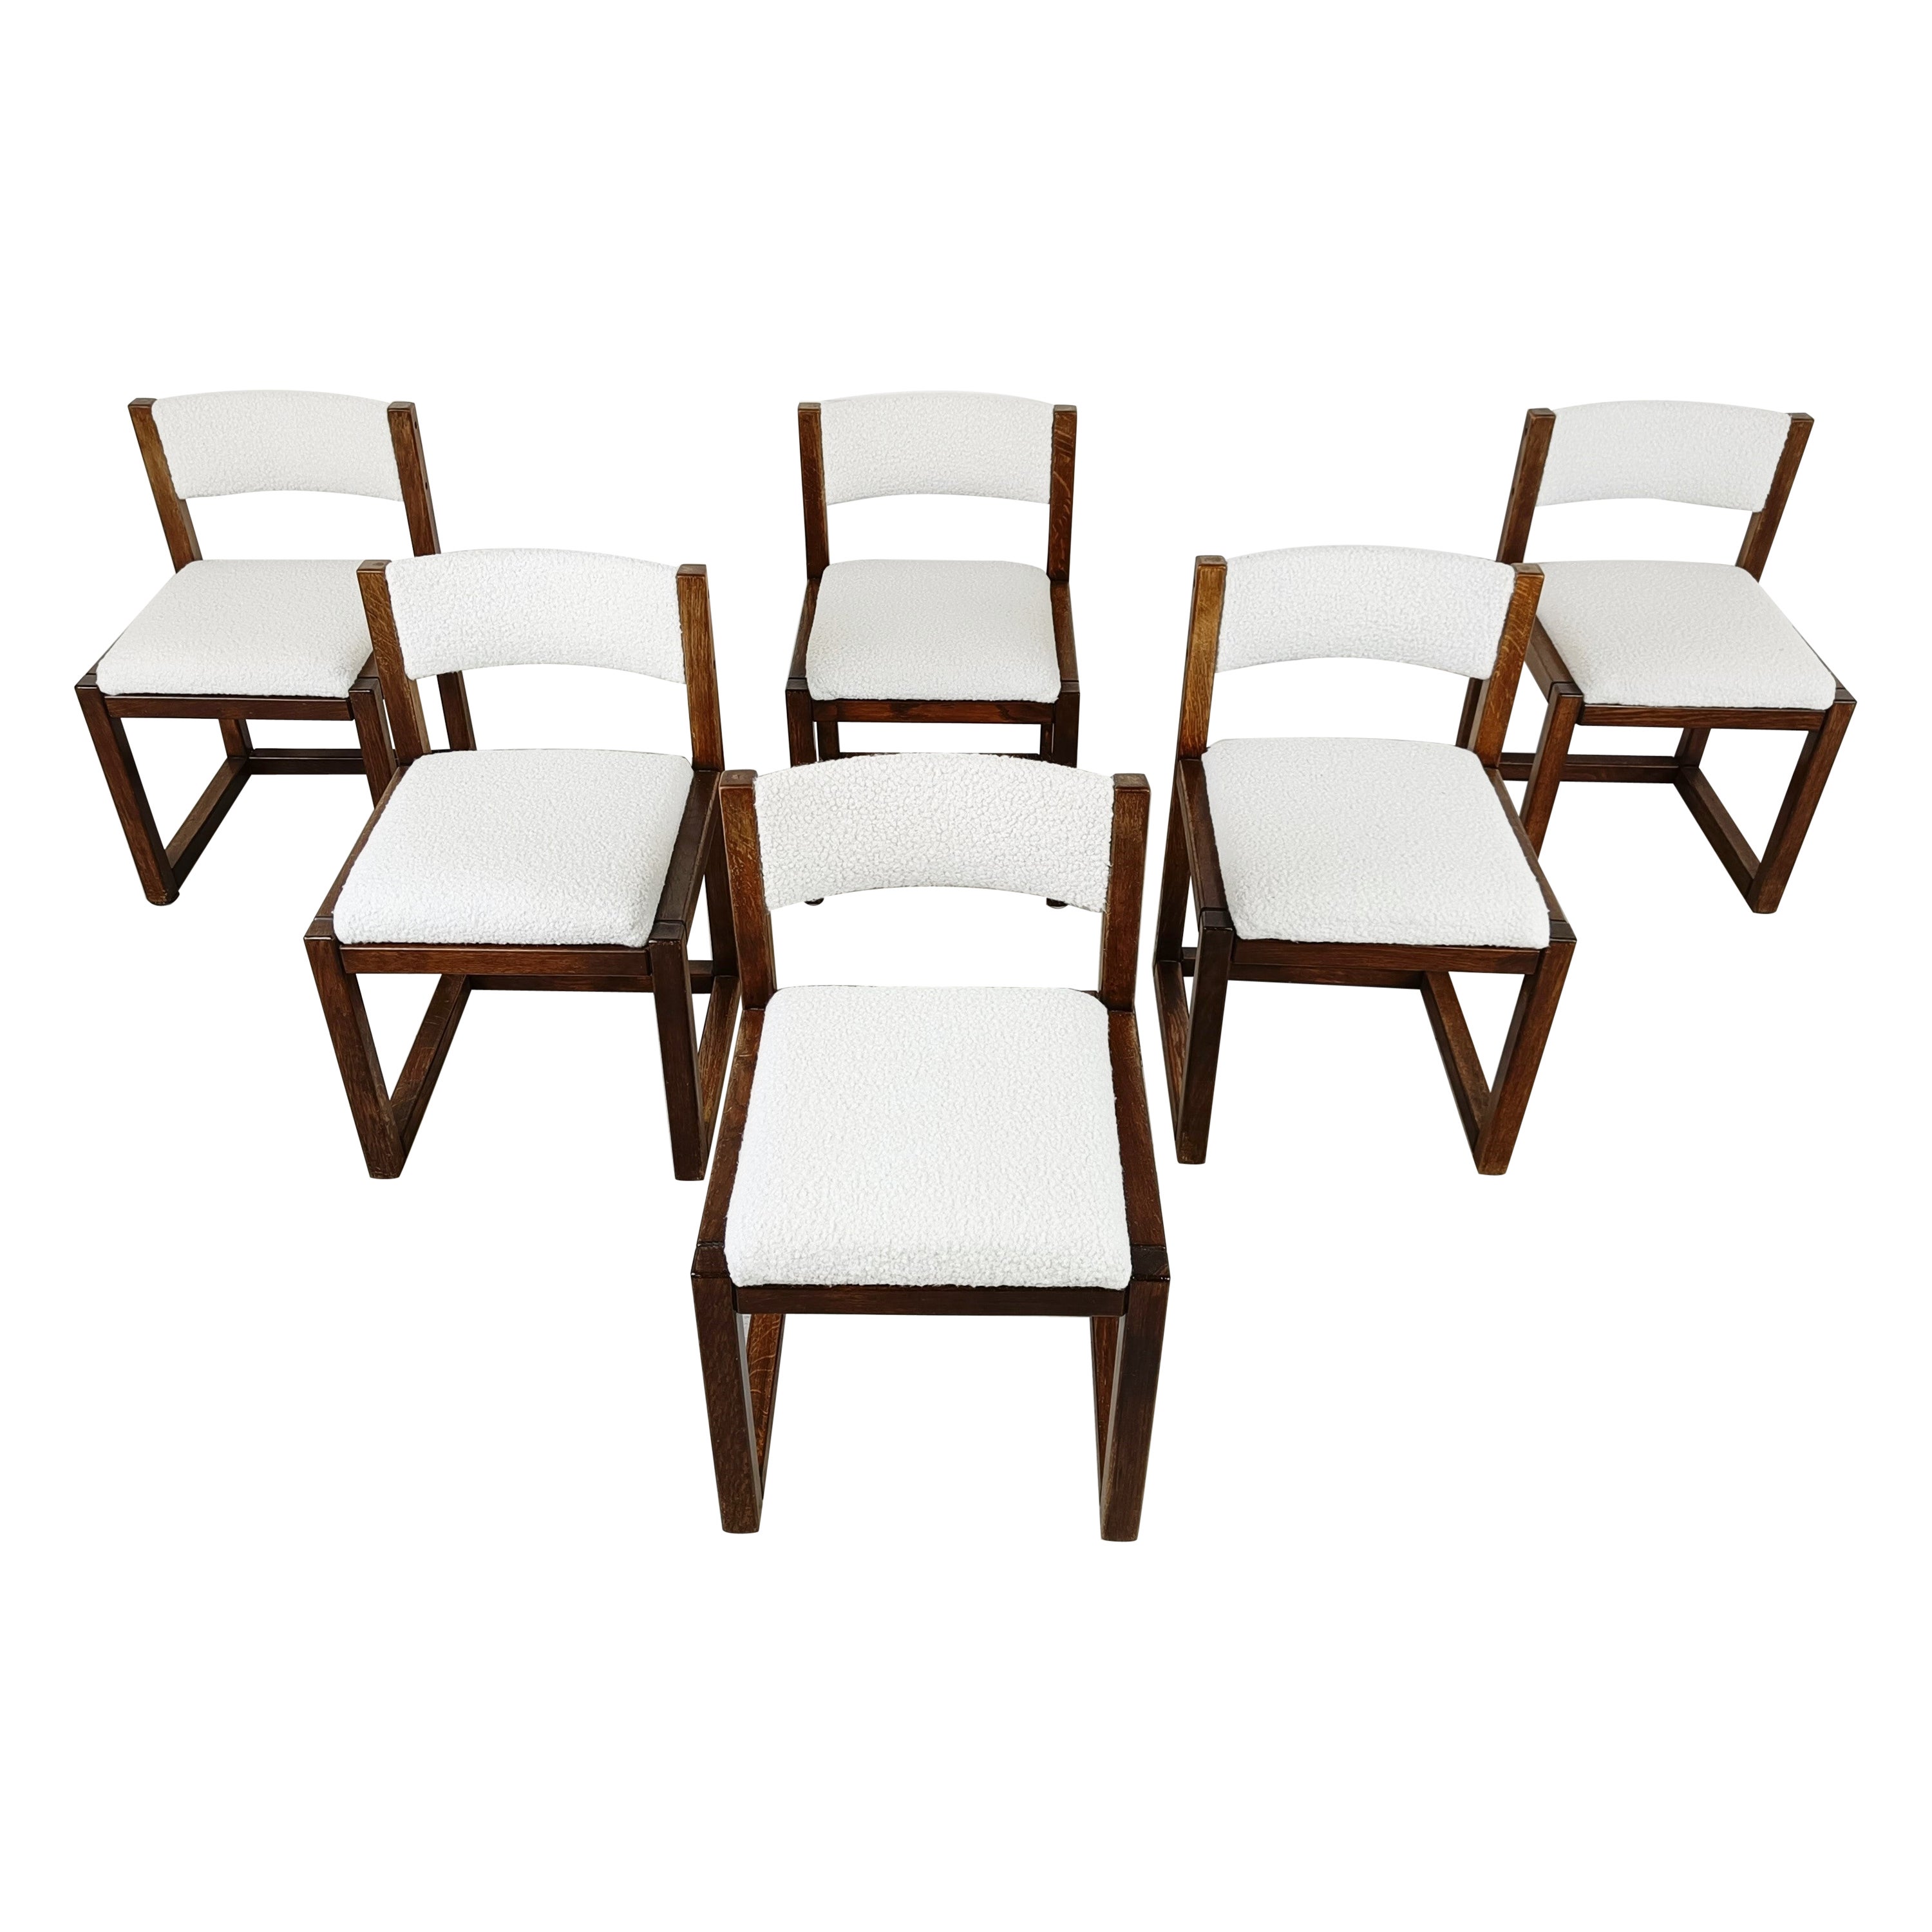 Vintage Brutalist Dining Chairs, Set of 6 - 1960s